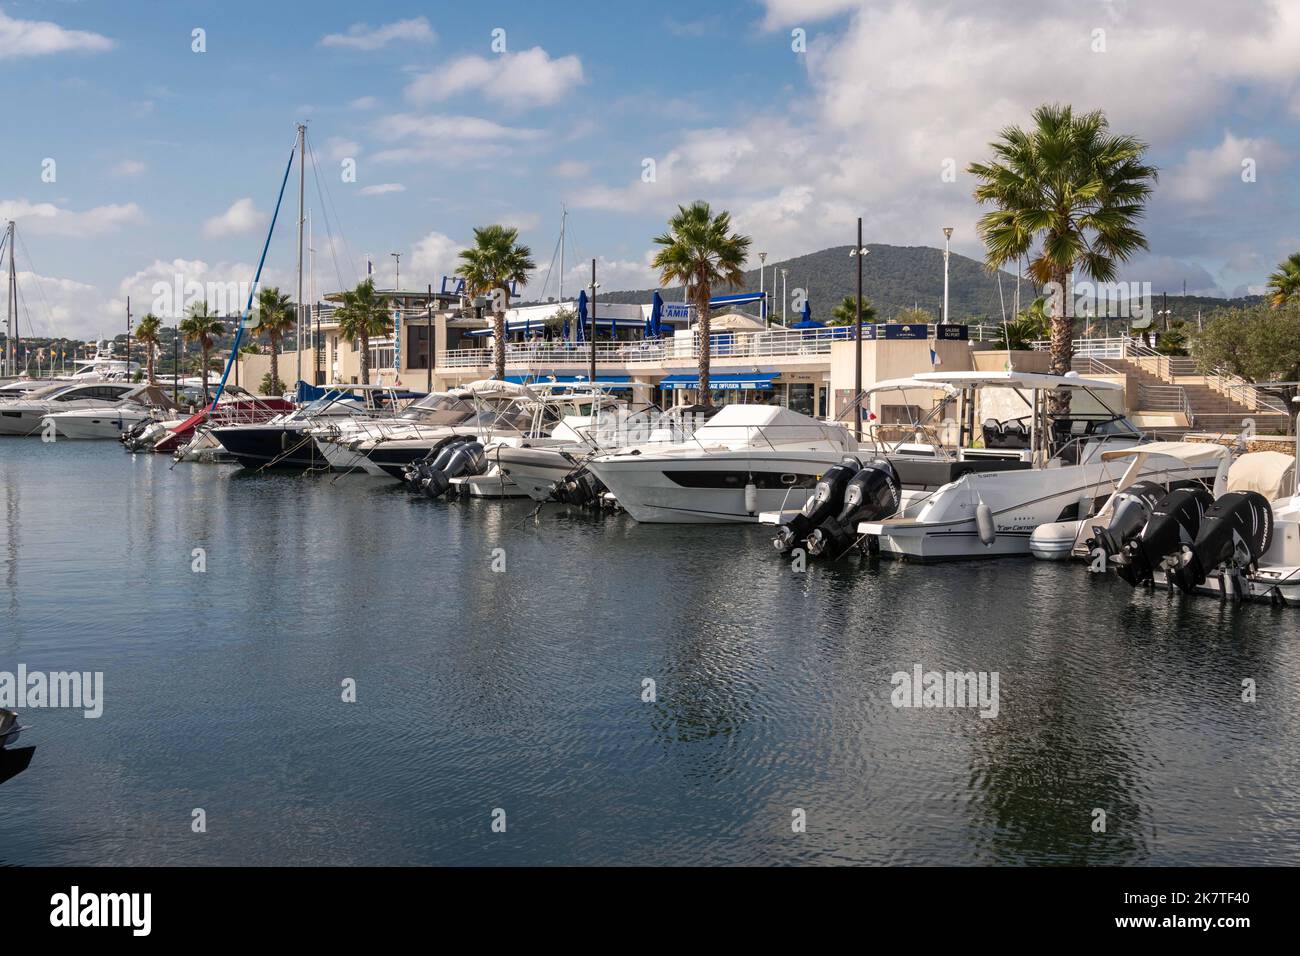 The Port of Sainte Maxime, in the Var department of the Provence-Alpes-Côte d'Azur region in Southeastern France. Stock Photo